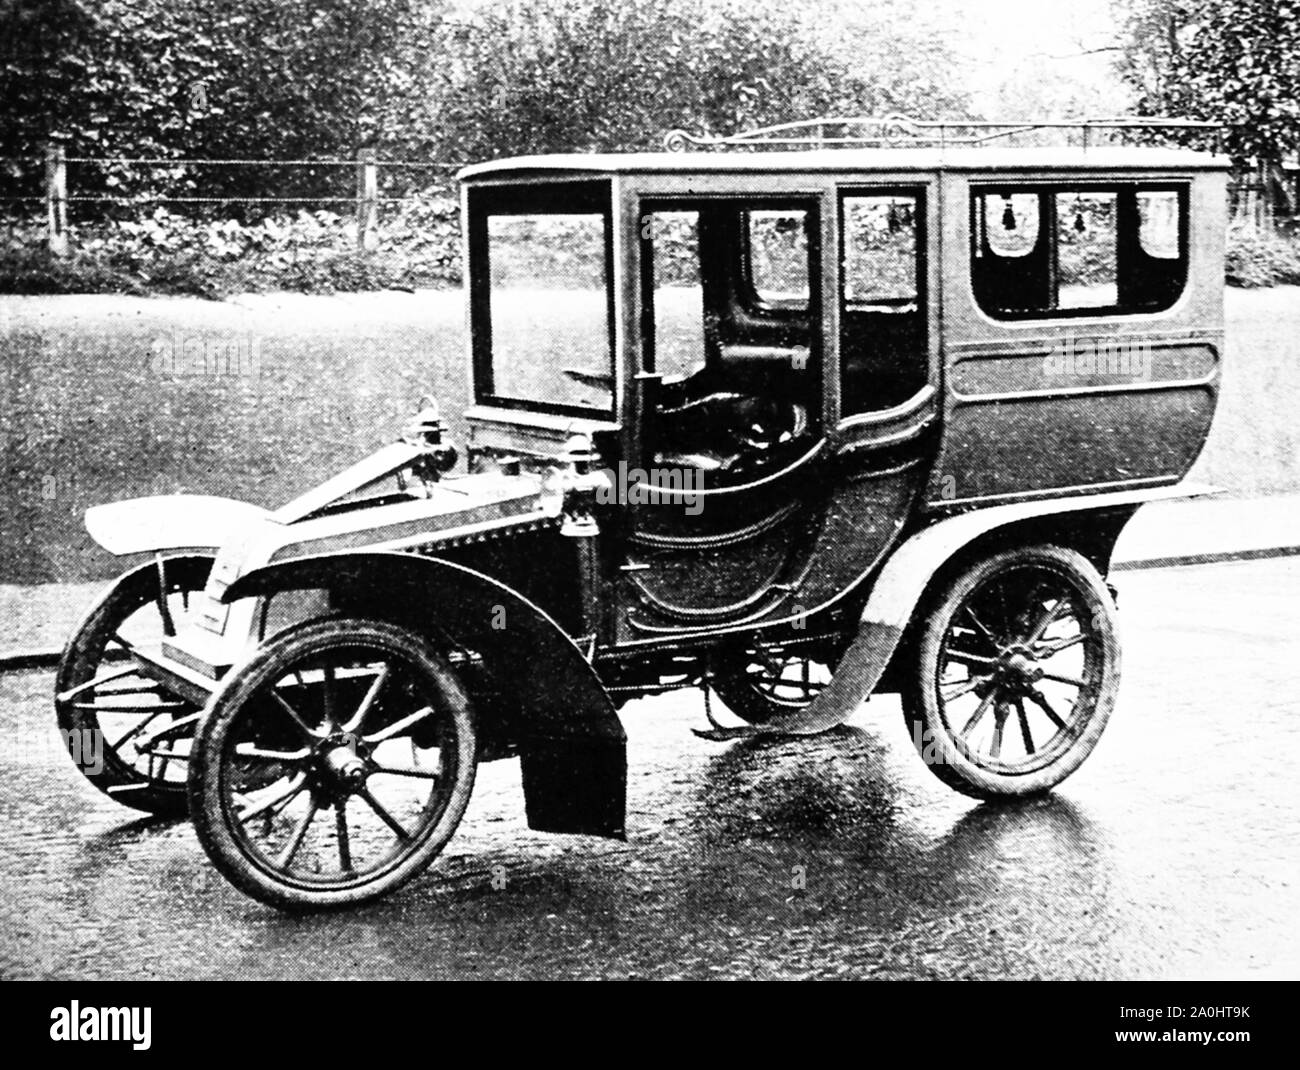 14 HP Renault veteran car with convertible body, early 1900s Stock Photo